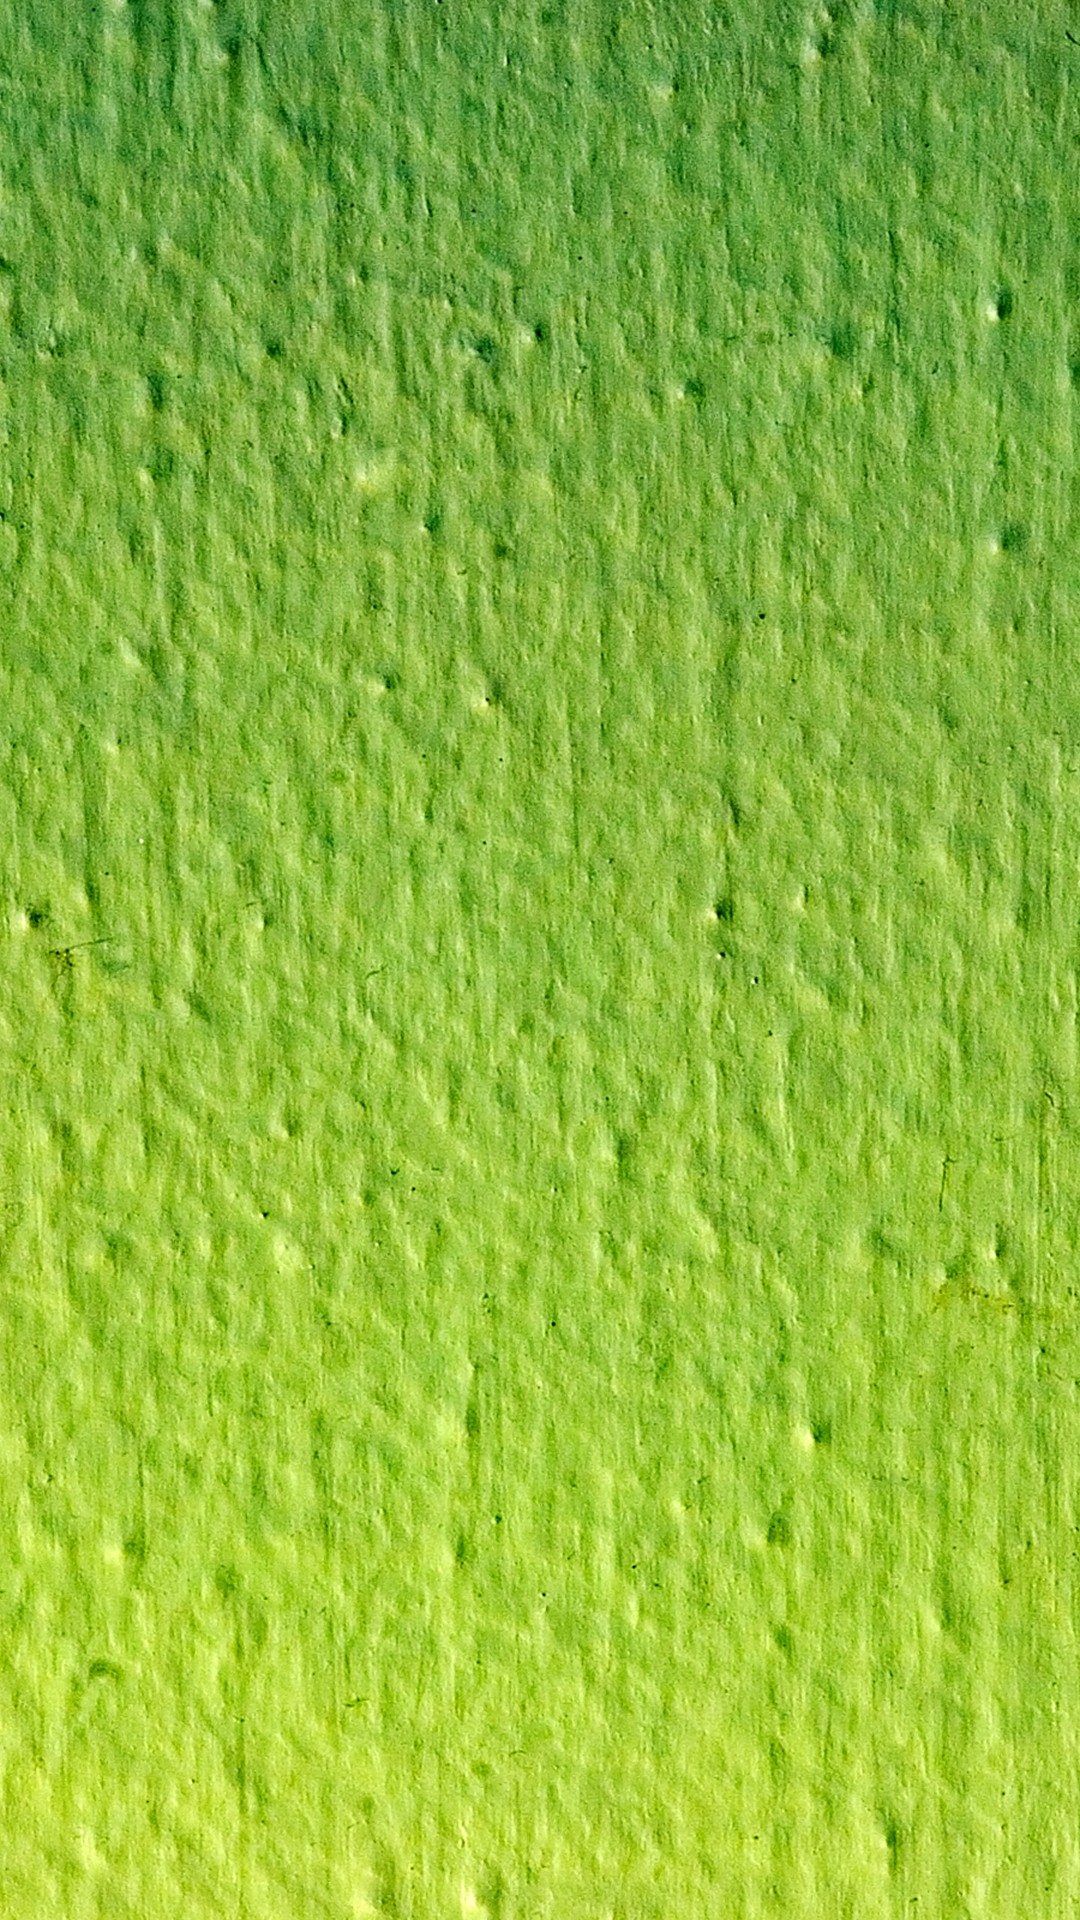 iPhone X Wallpaper Lime Green with resolution 1080X1920 pixel. You can make this wallpaper for your iPhone 5, 6, 7, 8, X backgrounds, Mobile Screensaver, or iPad Lock Screen